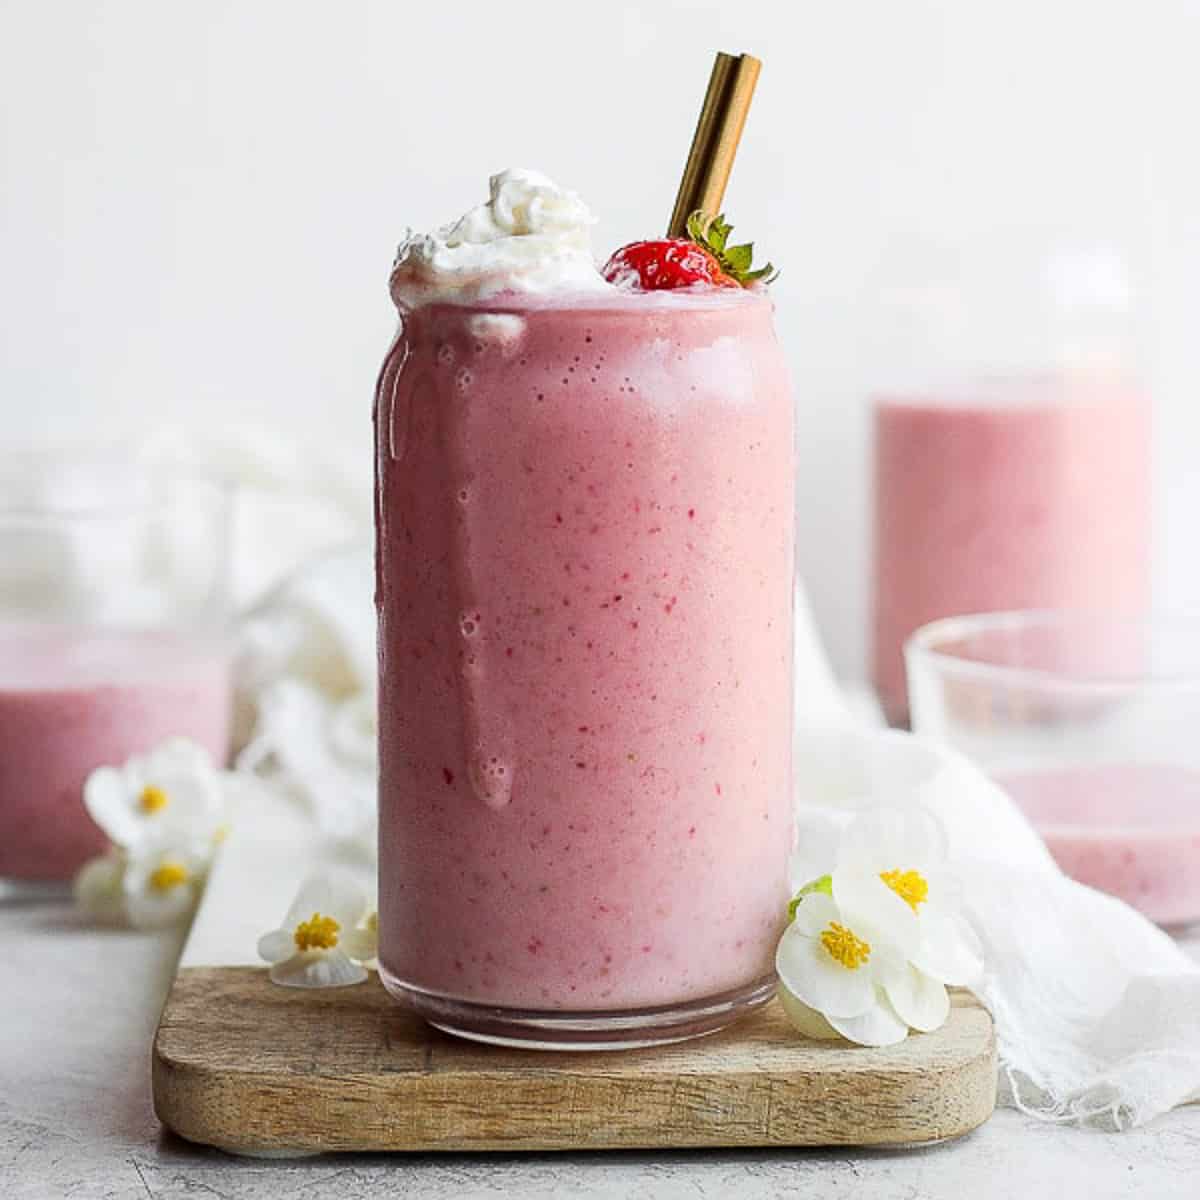 Recipe for a delicious strawberry smoothie.